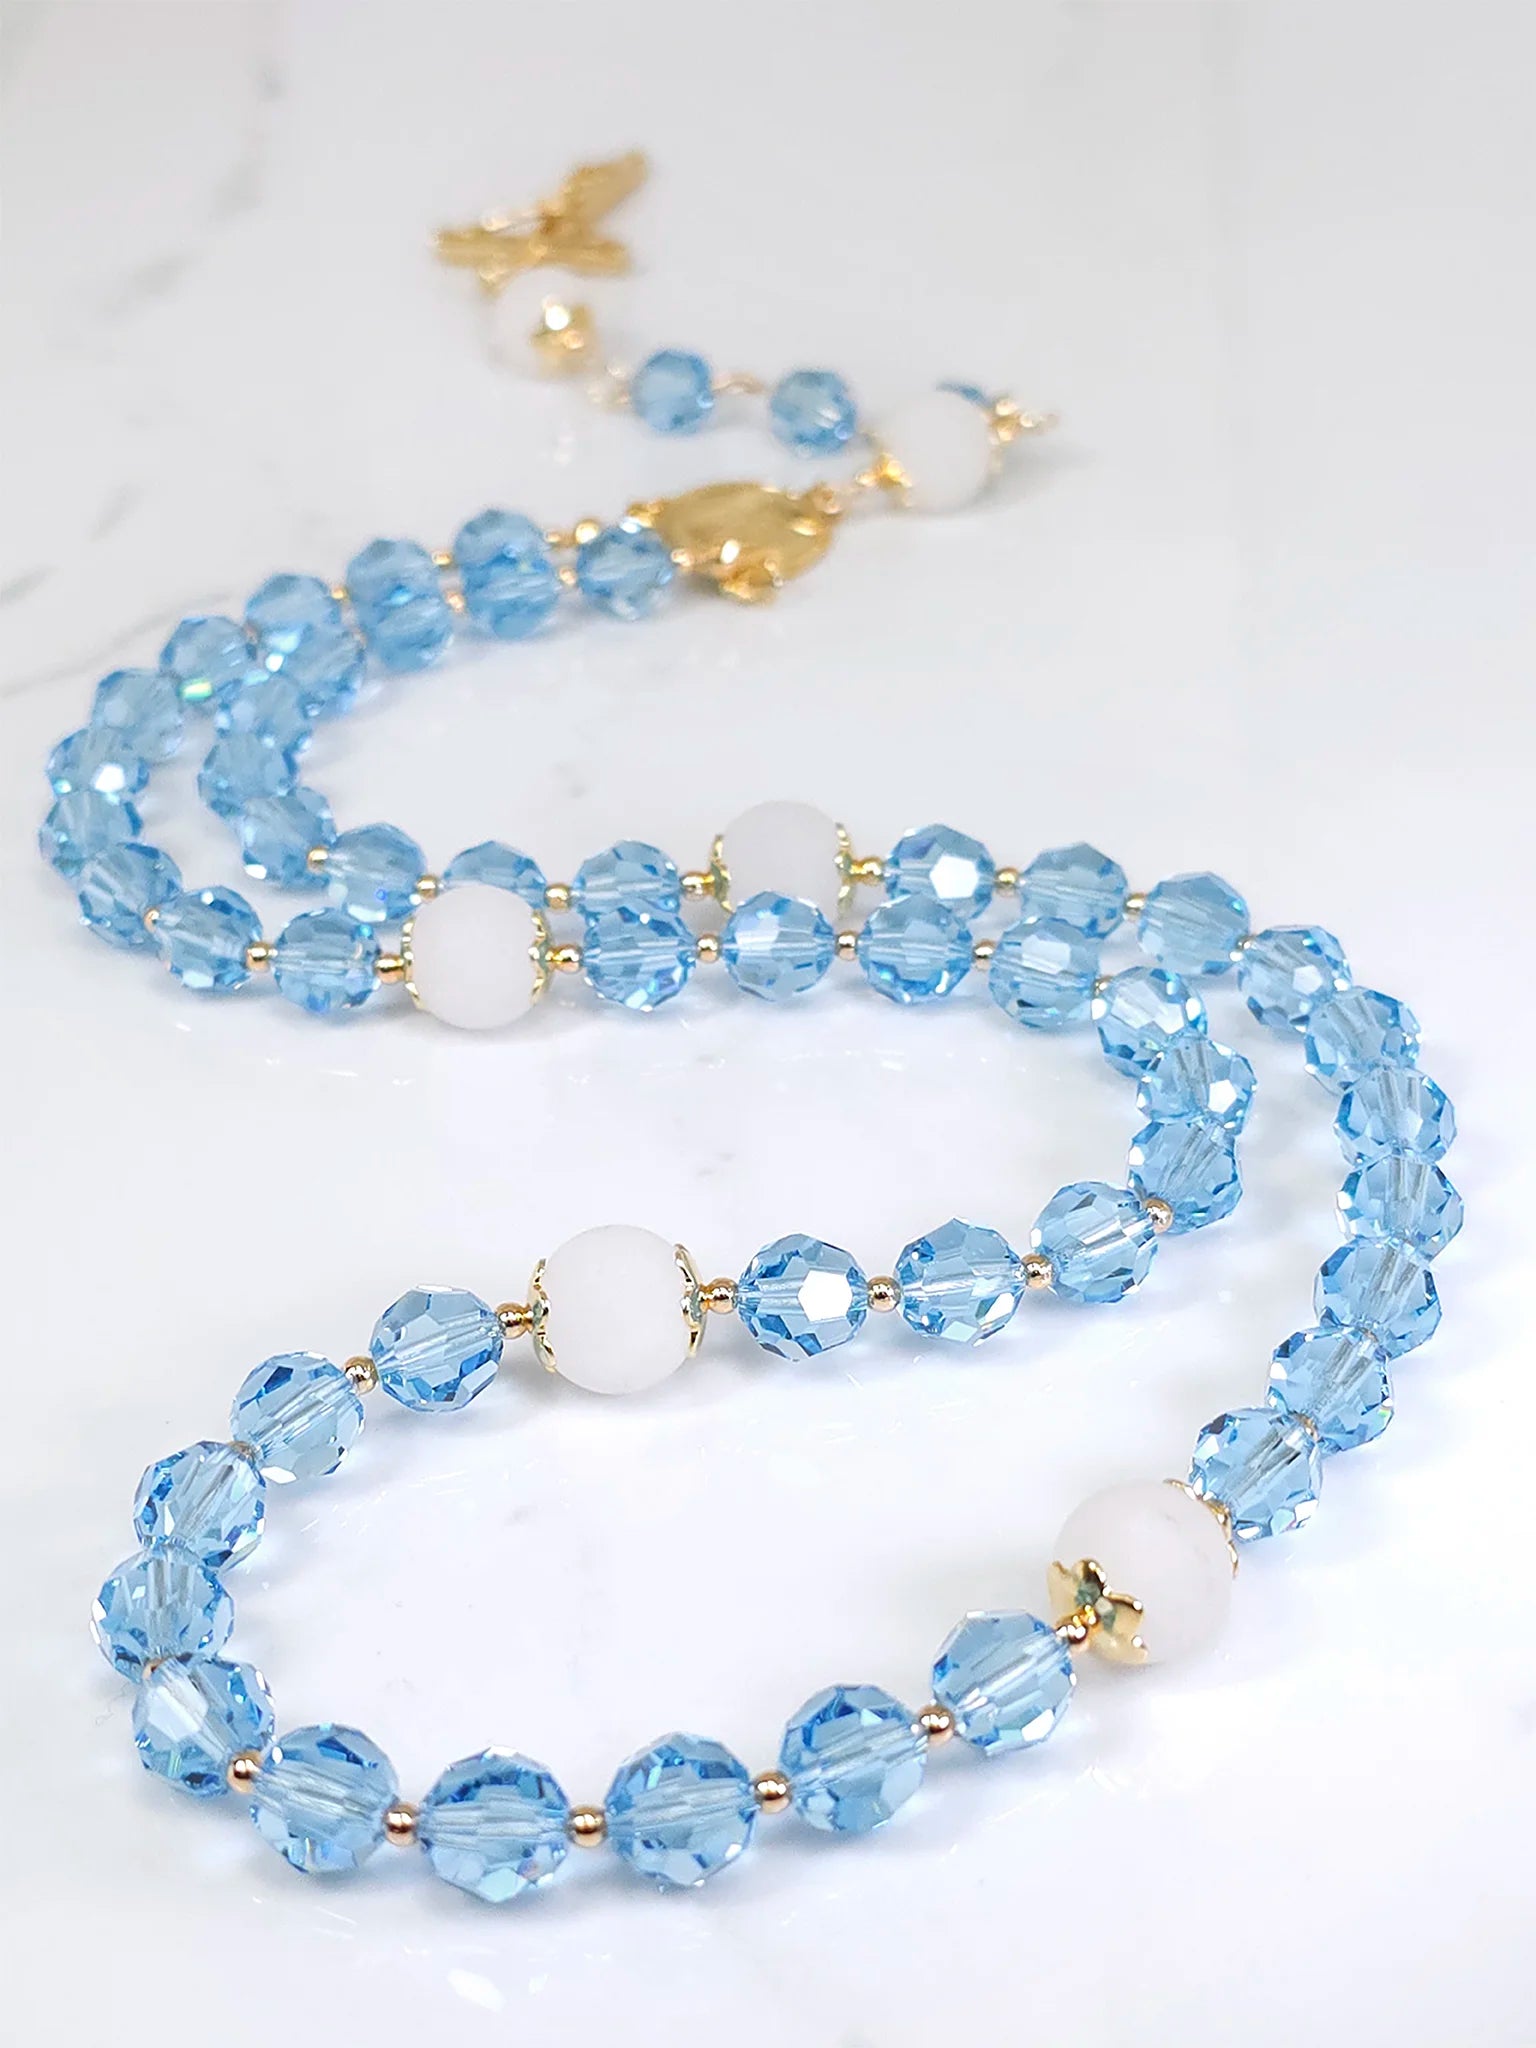 17.5-inch rosary necklace made of Blue Aquamarine Austrian Crystal with gold-filled bead caps and spacers.